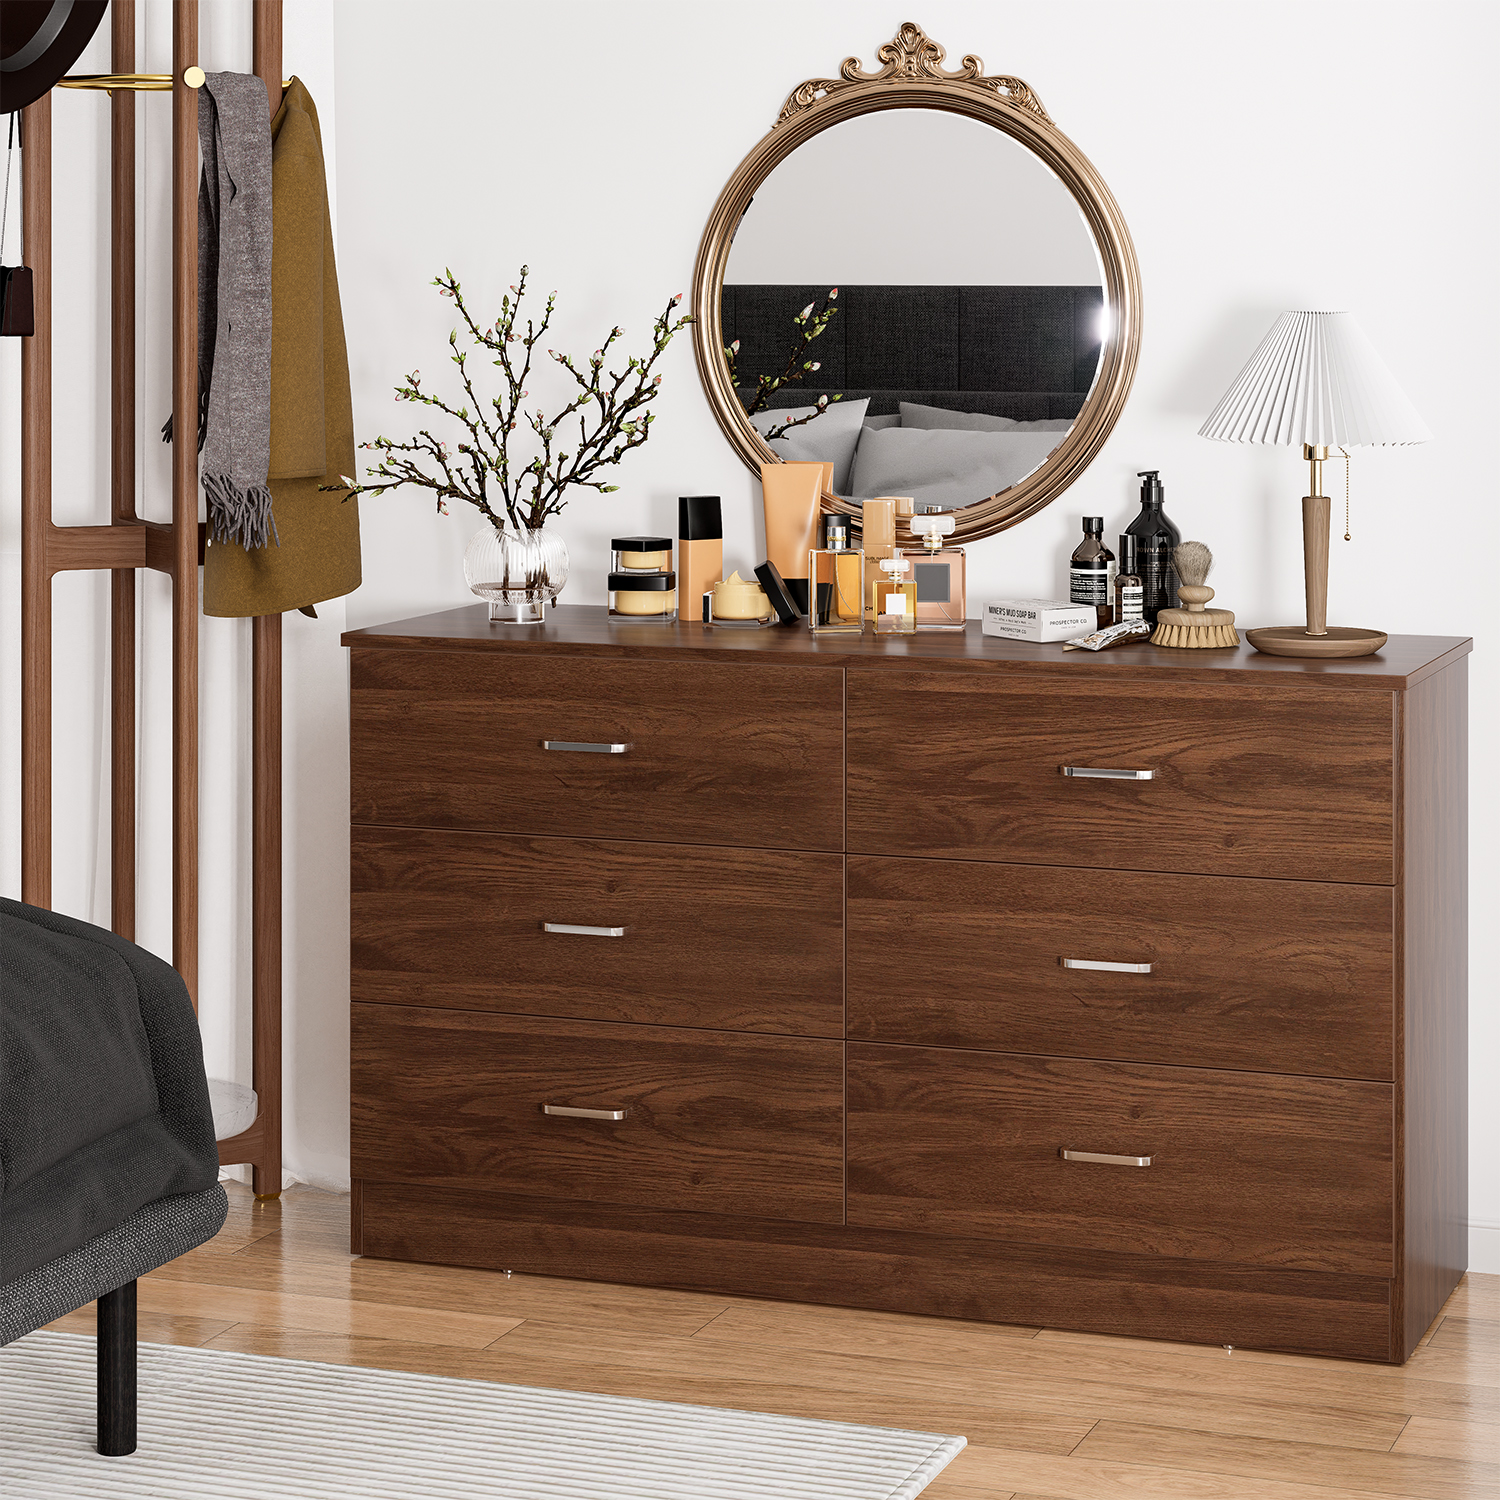 Winkalon 6 Drawer Brown Double Dresser,Wood Storage Cabinet with Easy Pull Out Handles for Living Room,Chest of Drawers for Bedroom - image 1 of 10